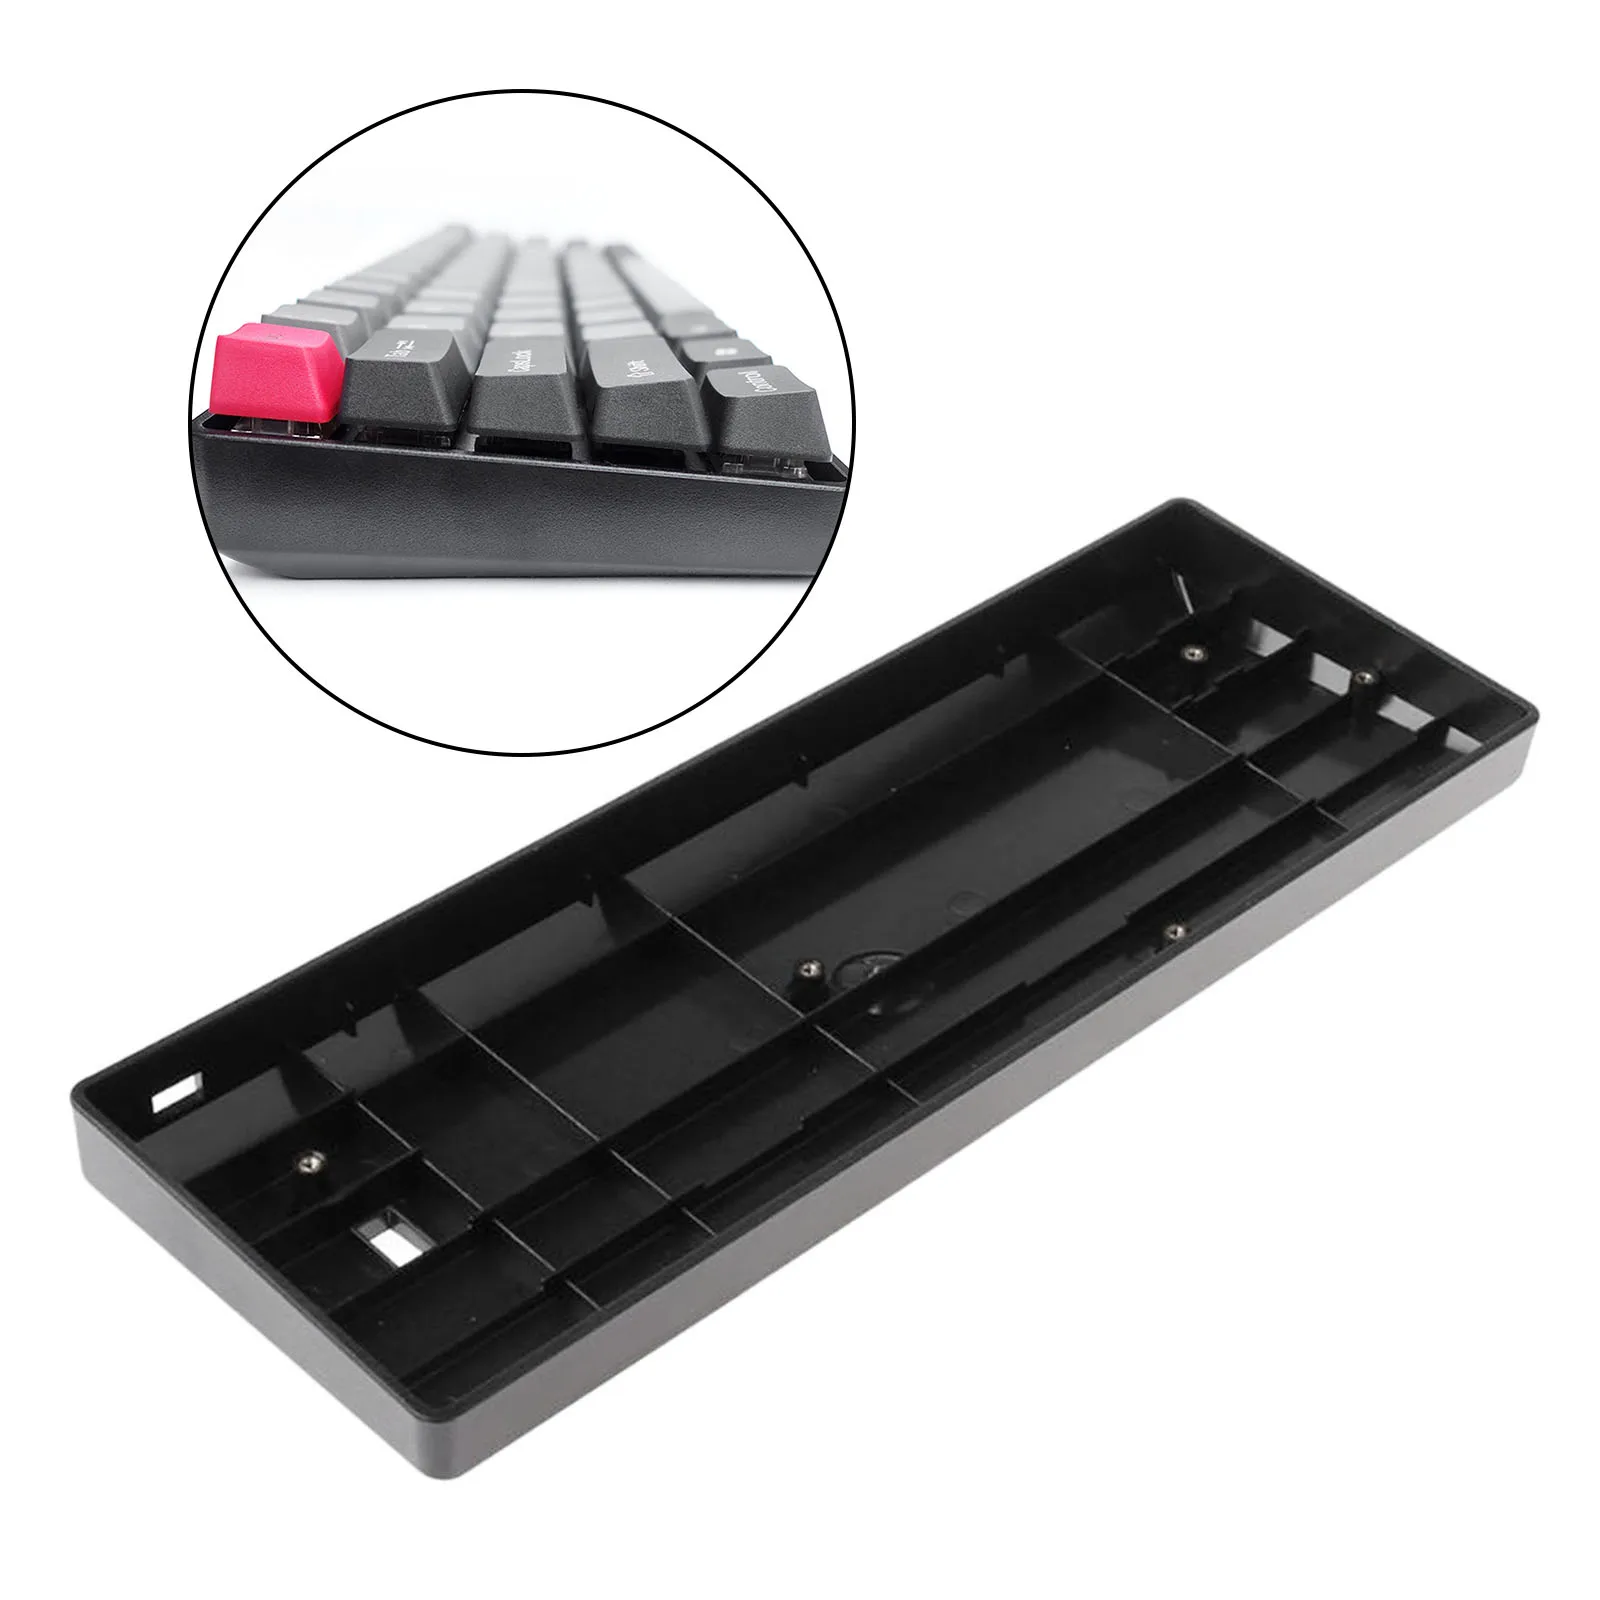 60% Mechanical Keyboard Shell Case Frame DIY Component Compatible with GH60 POKER2 FACEU 60 for Gaming and Productivity